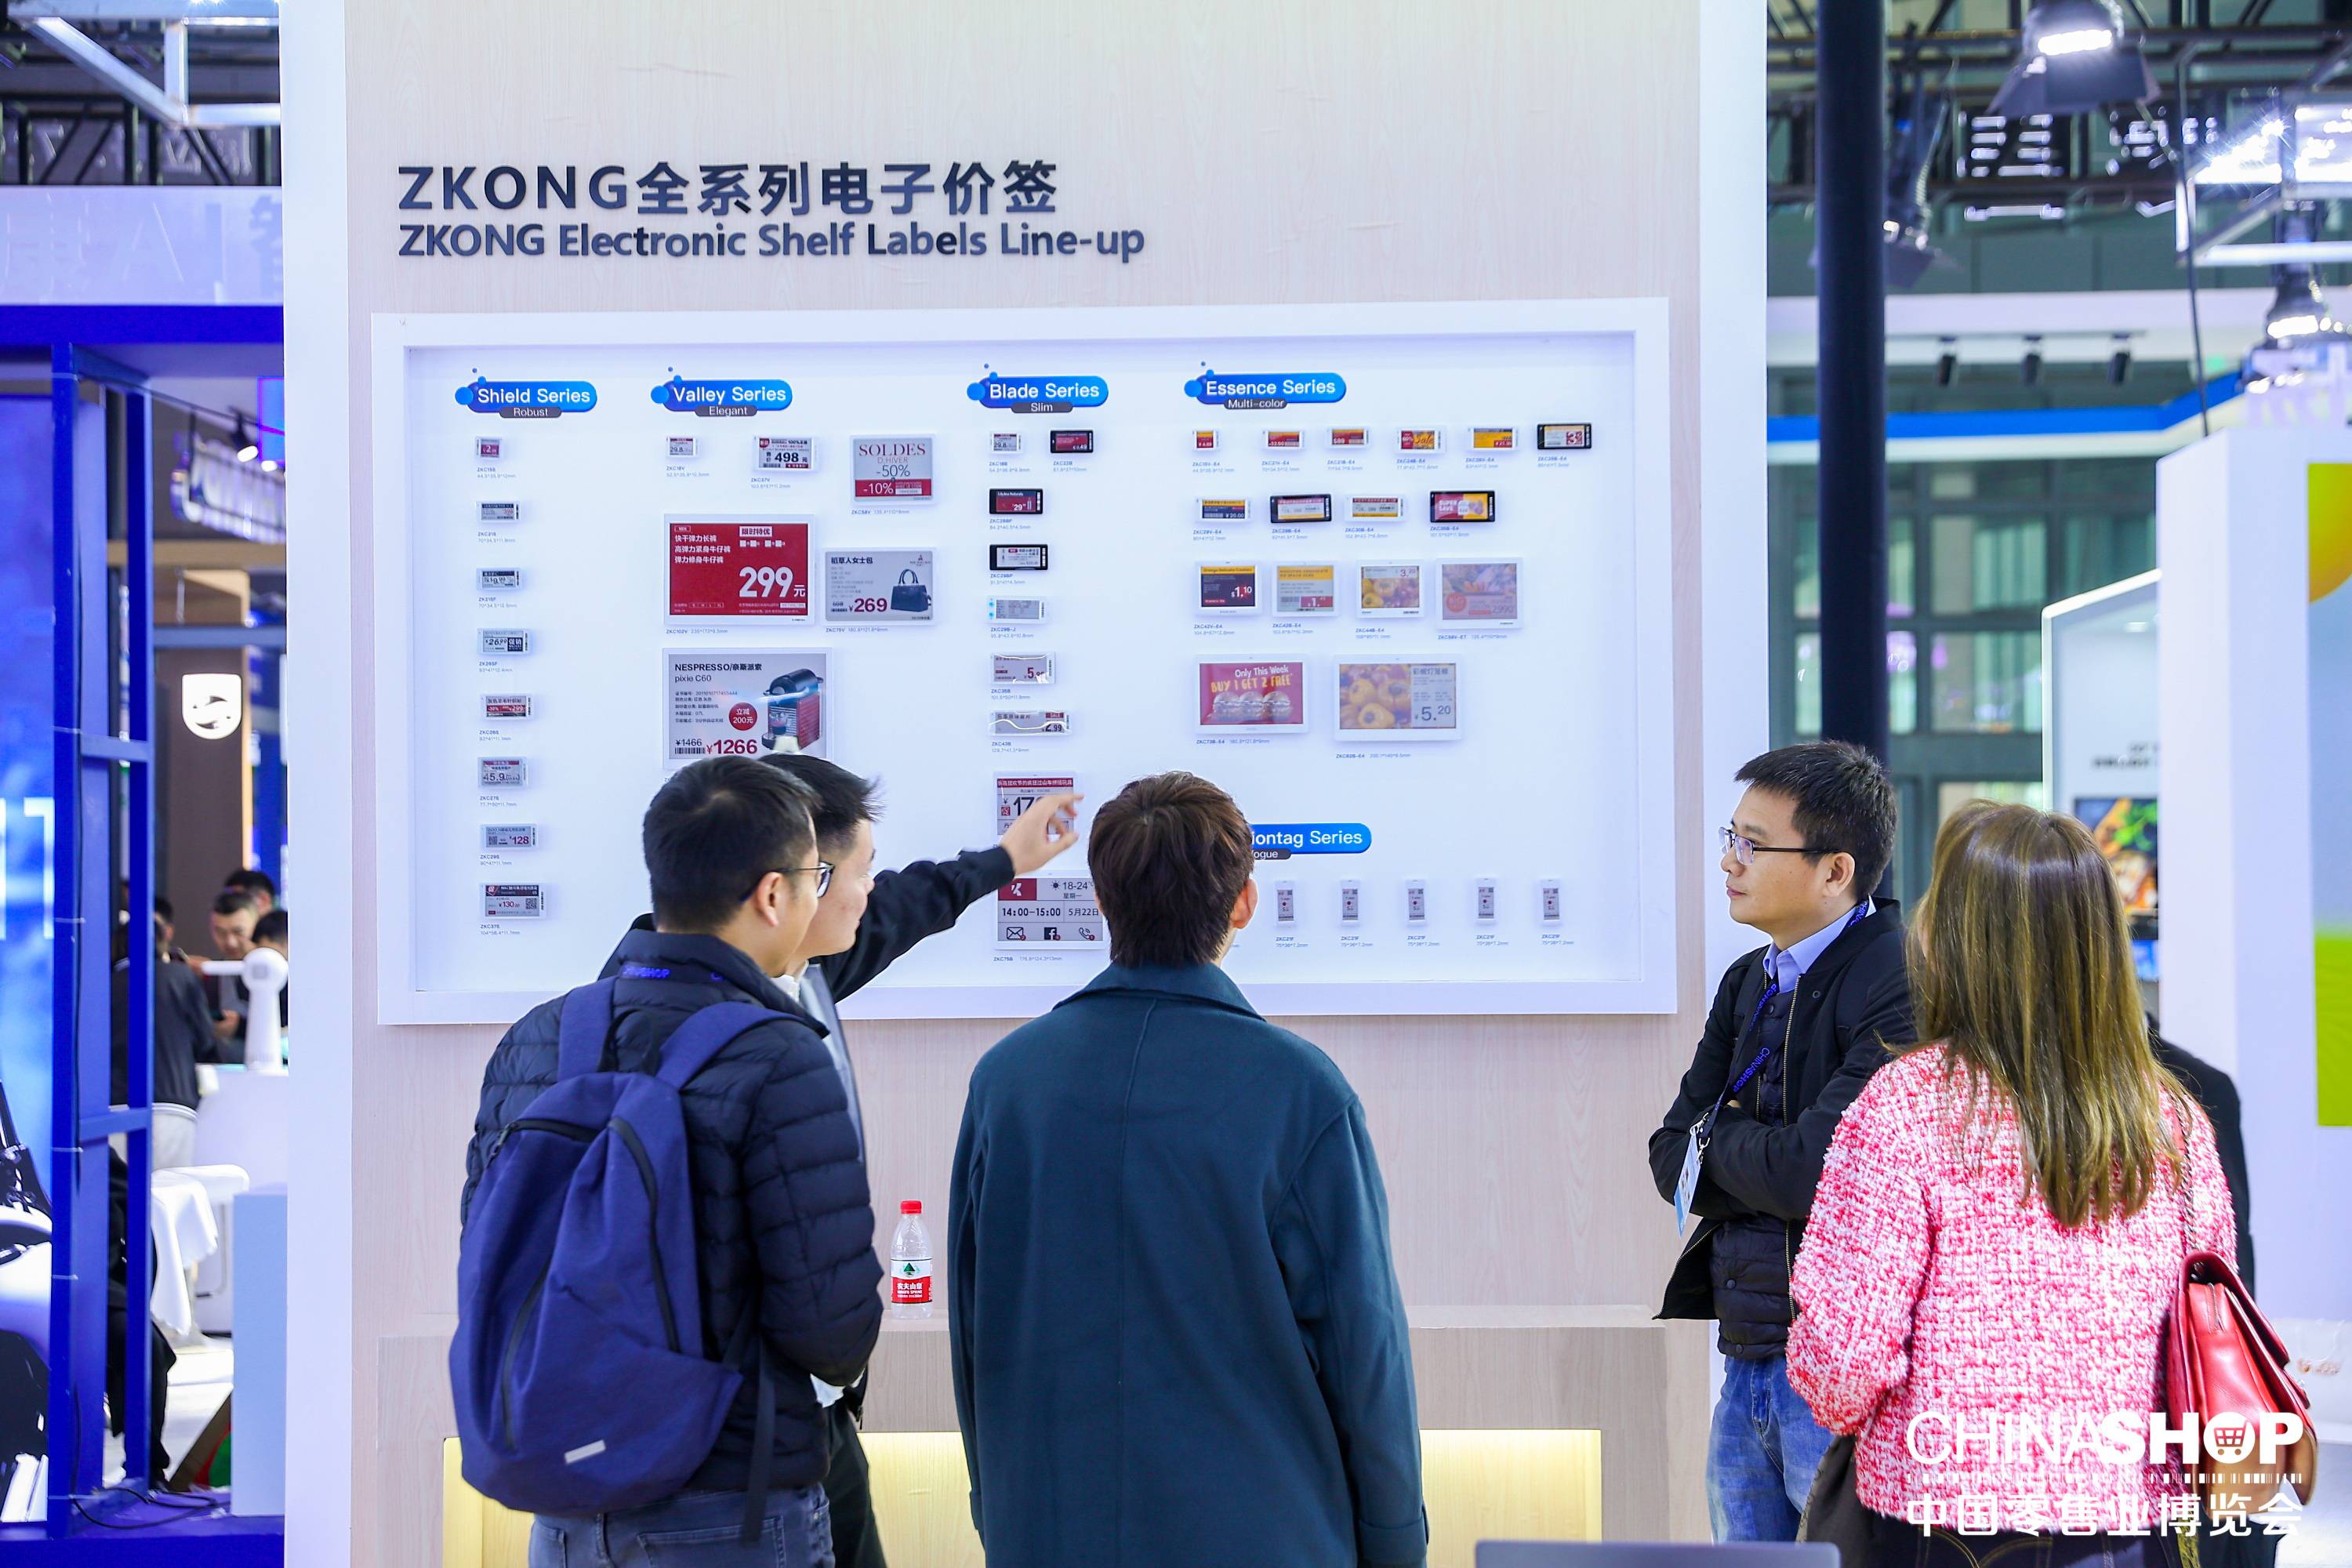 infusing-retail-with-new-energy-zkong-shines-at-chinashop